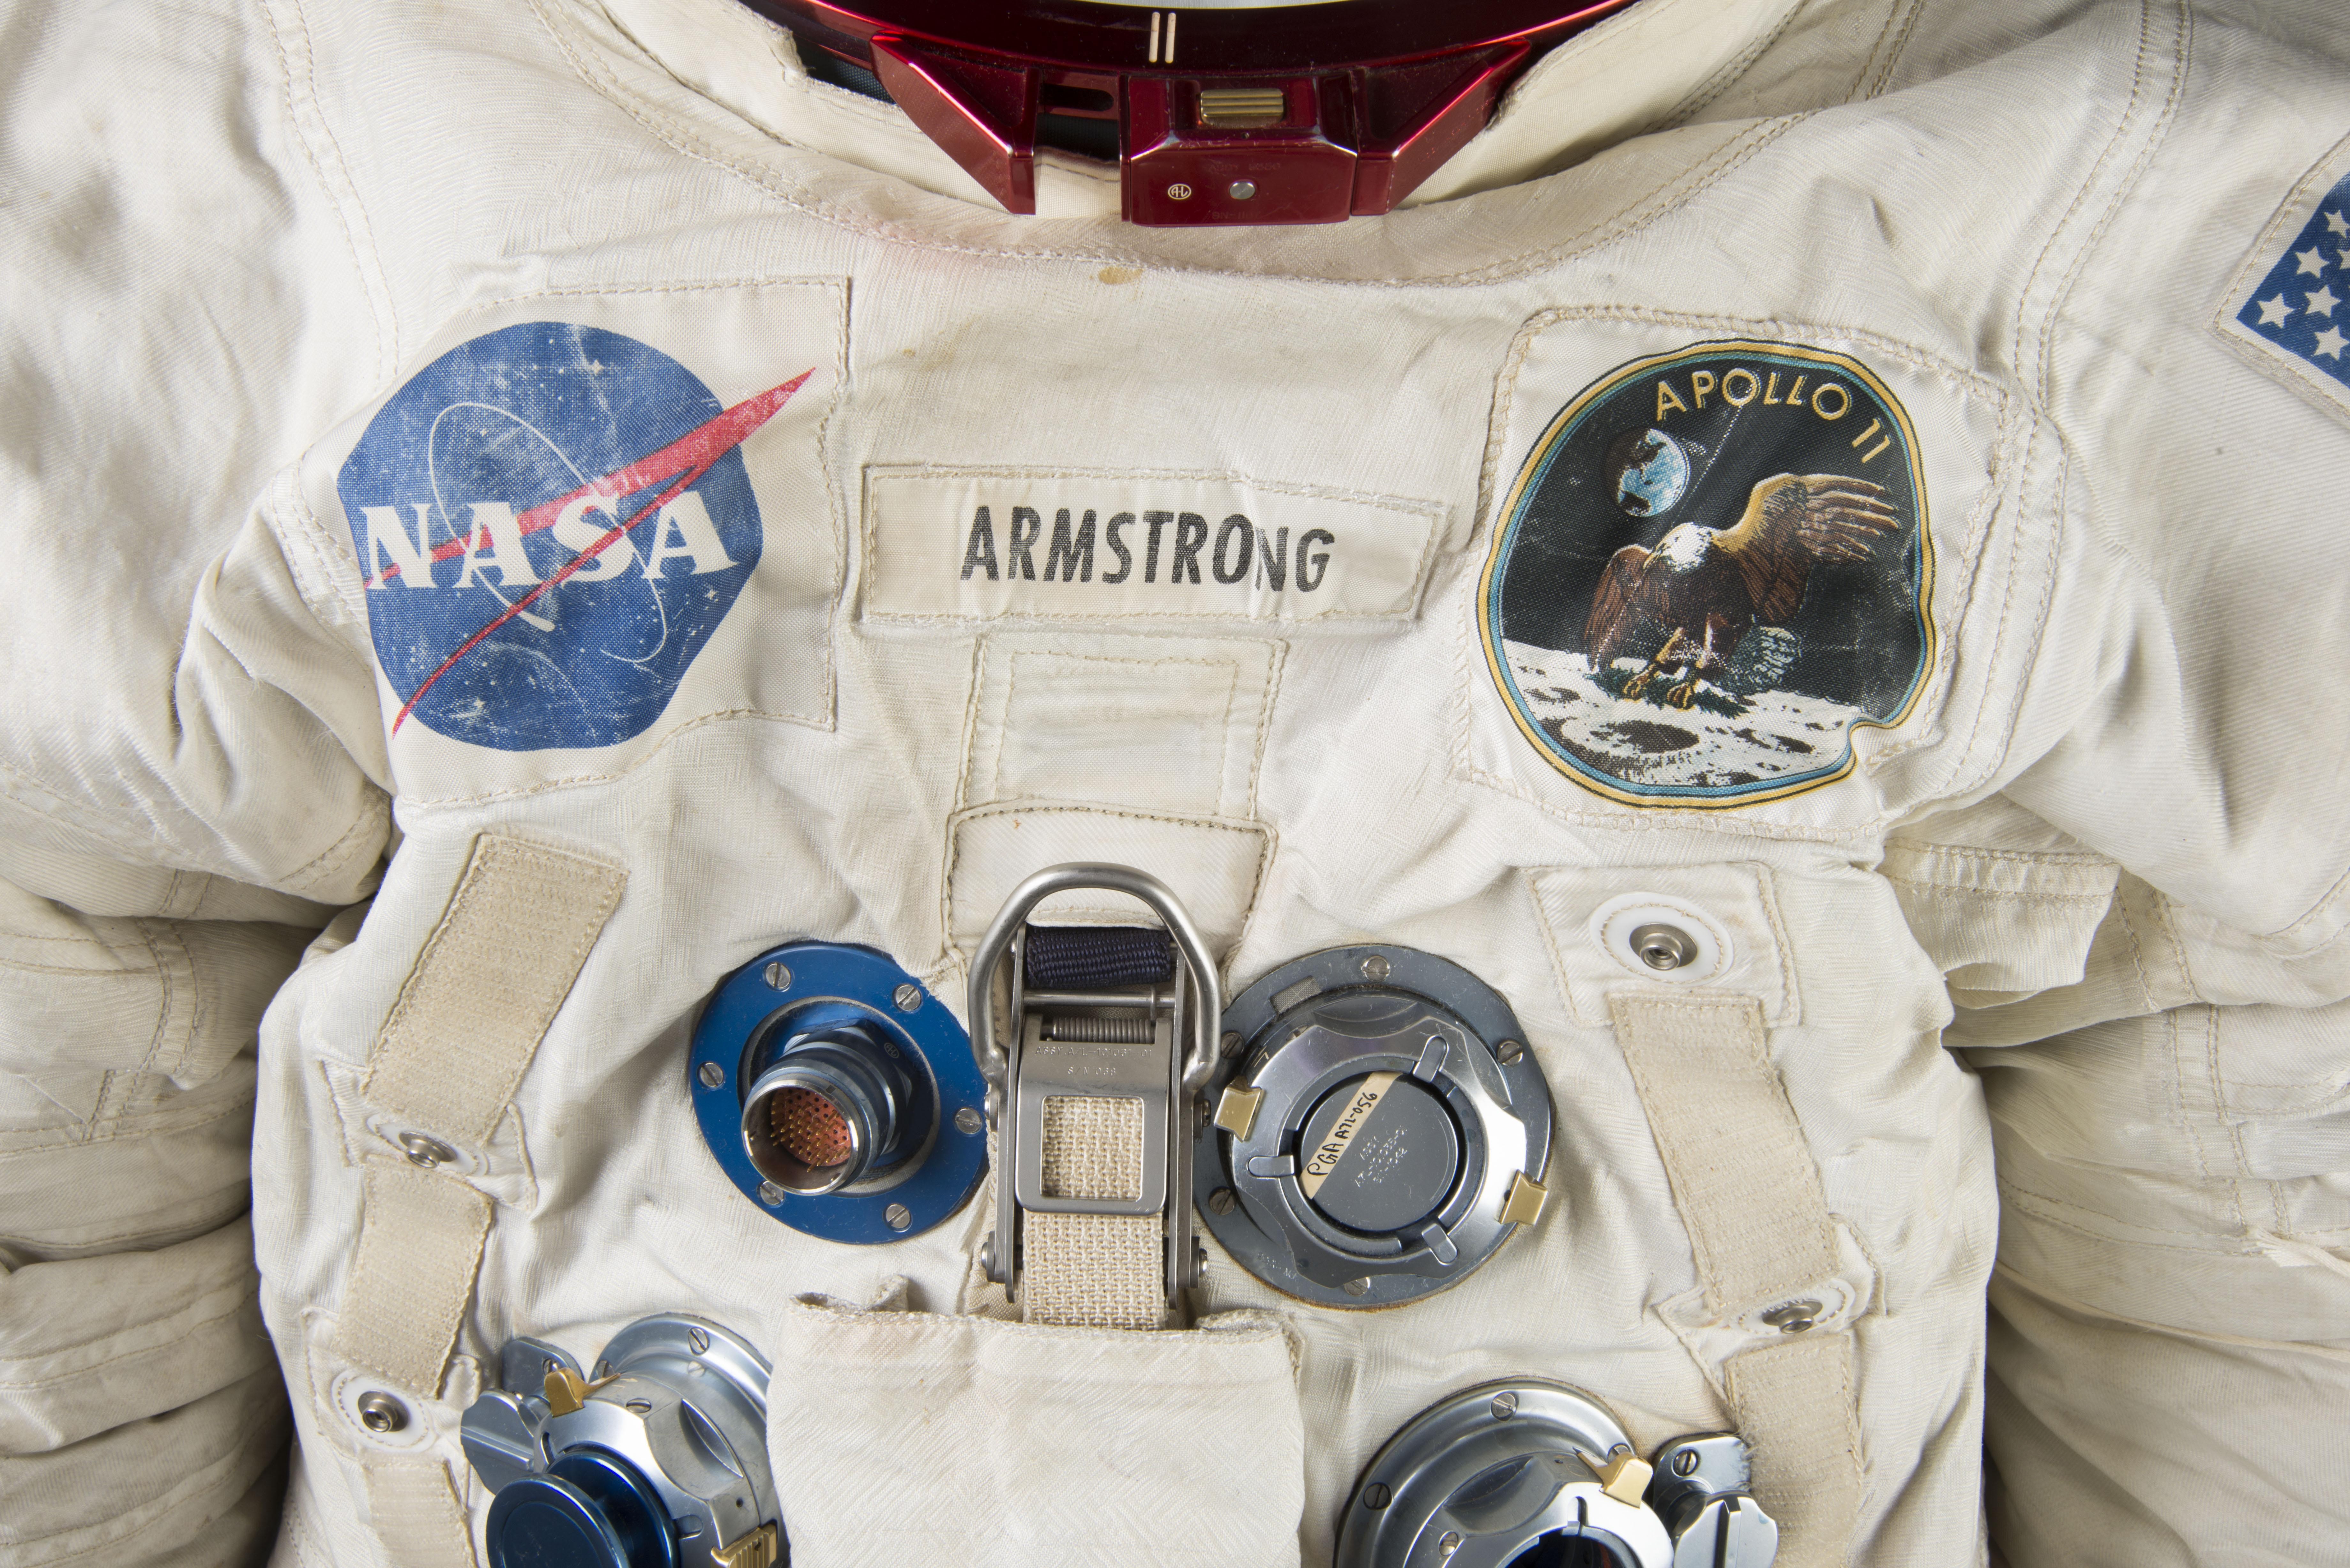 General 7360x4912 Neil Armstrong NASA space spacesuit history